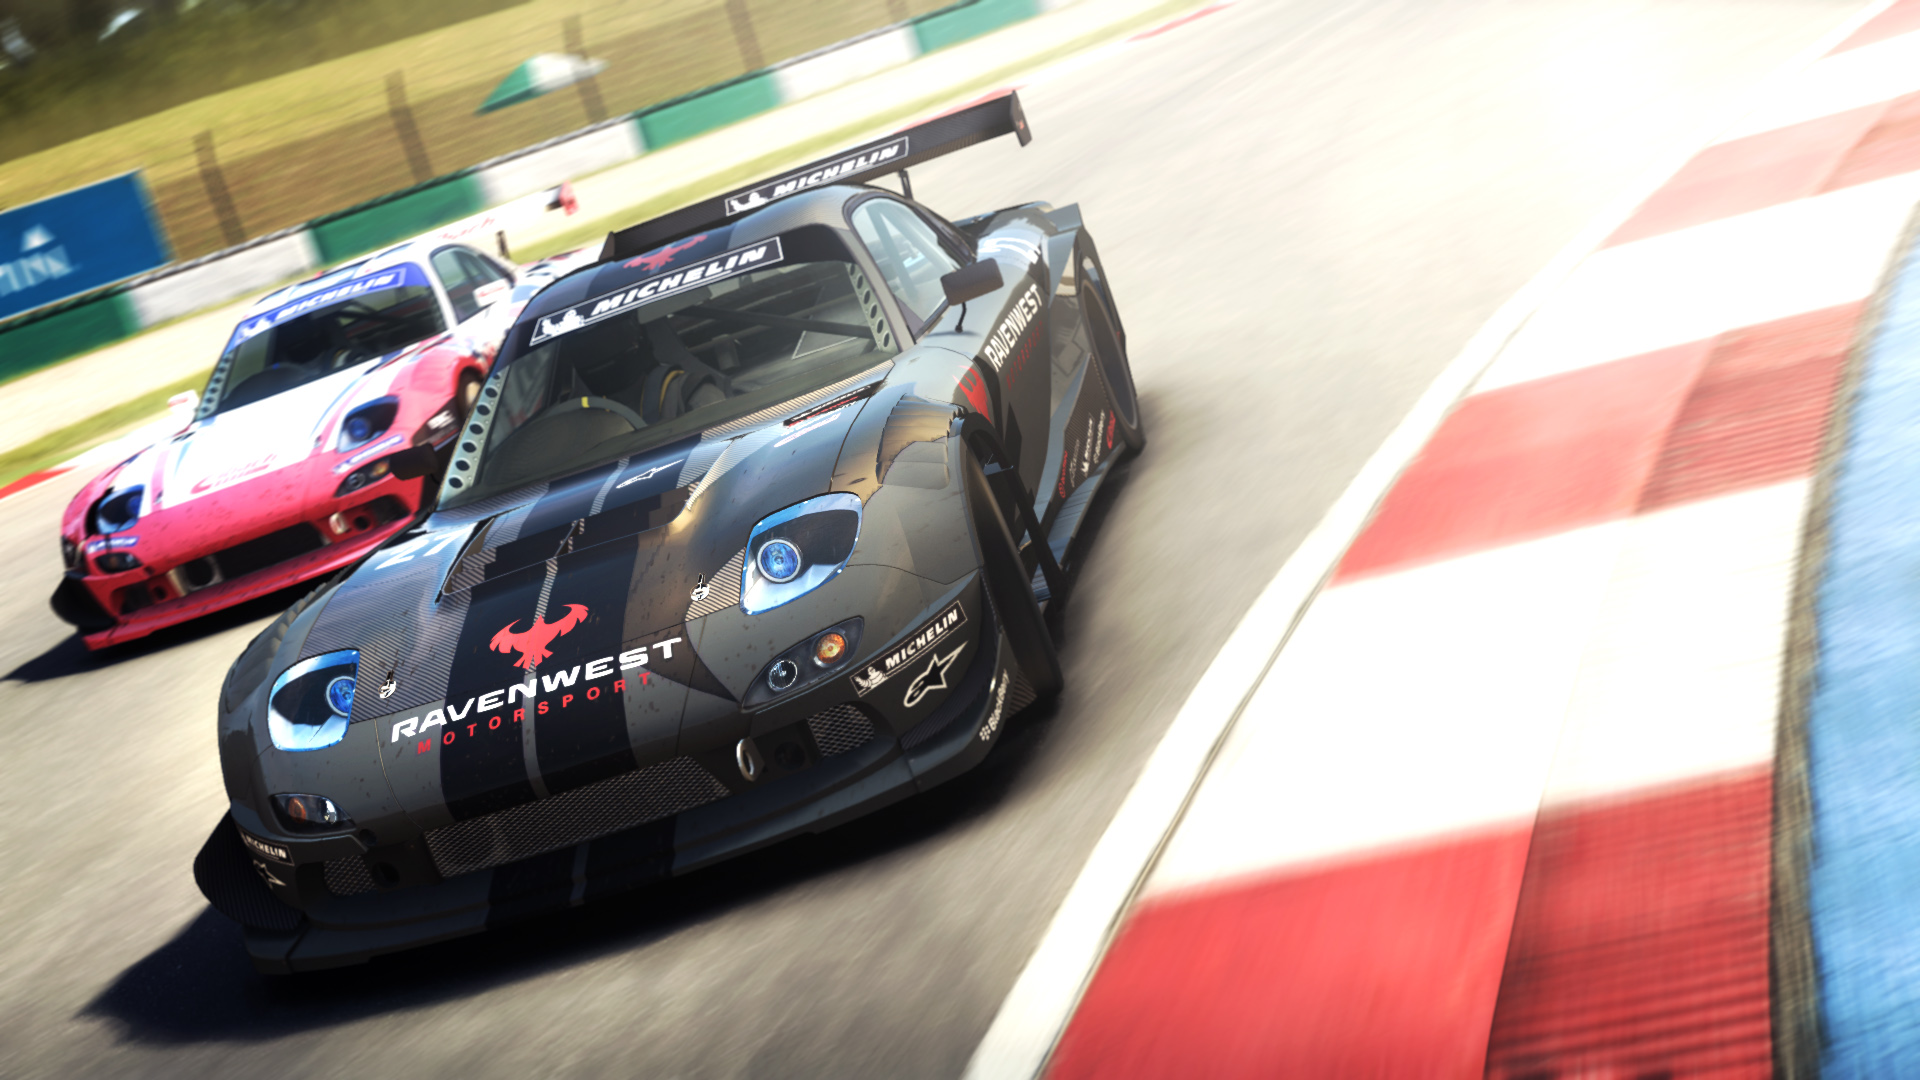 Here's Why Grid Autosport Is Not On The Xbox One And PS4